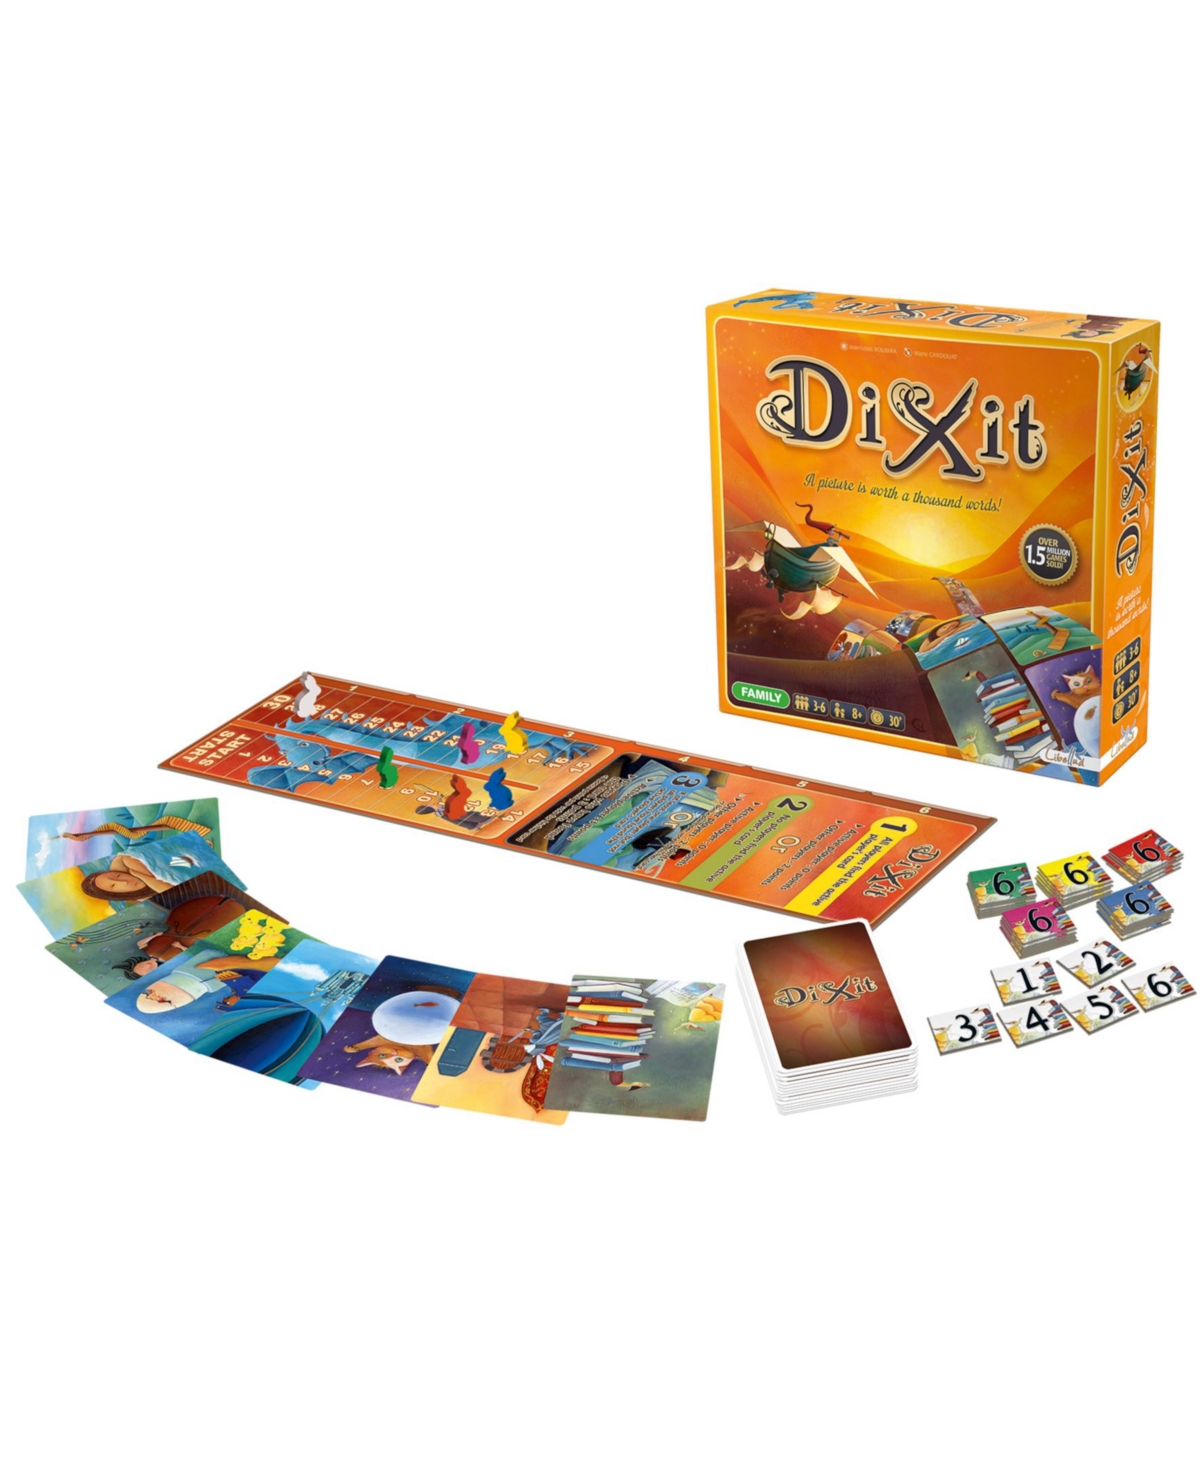 Asmodee Editions Dixit In Multi